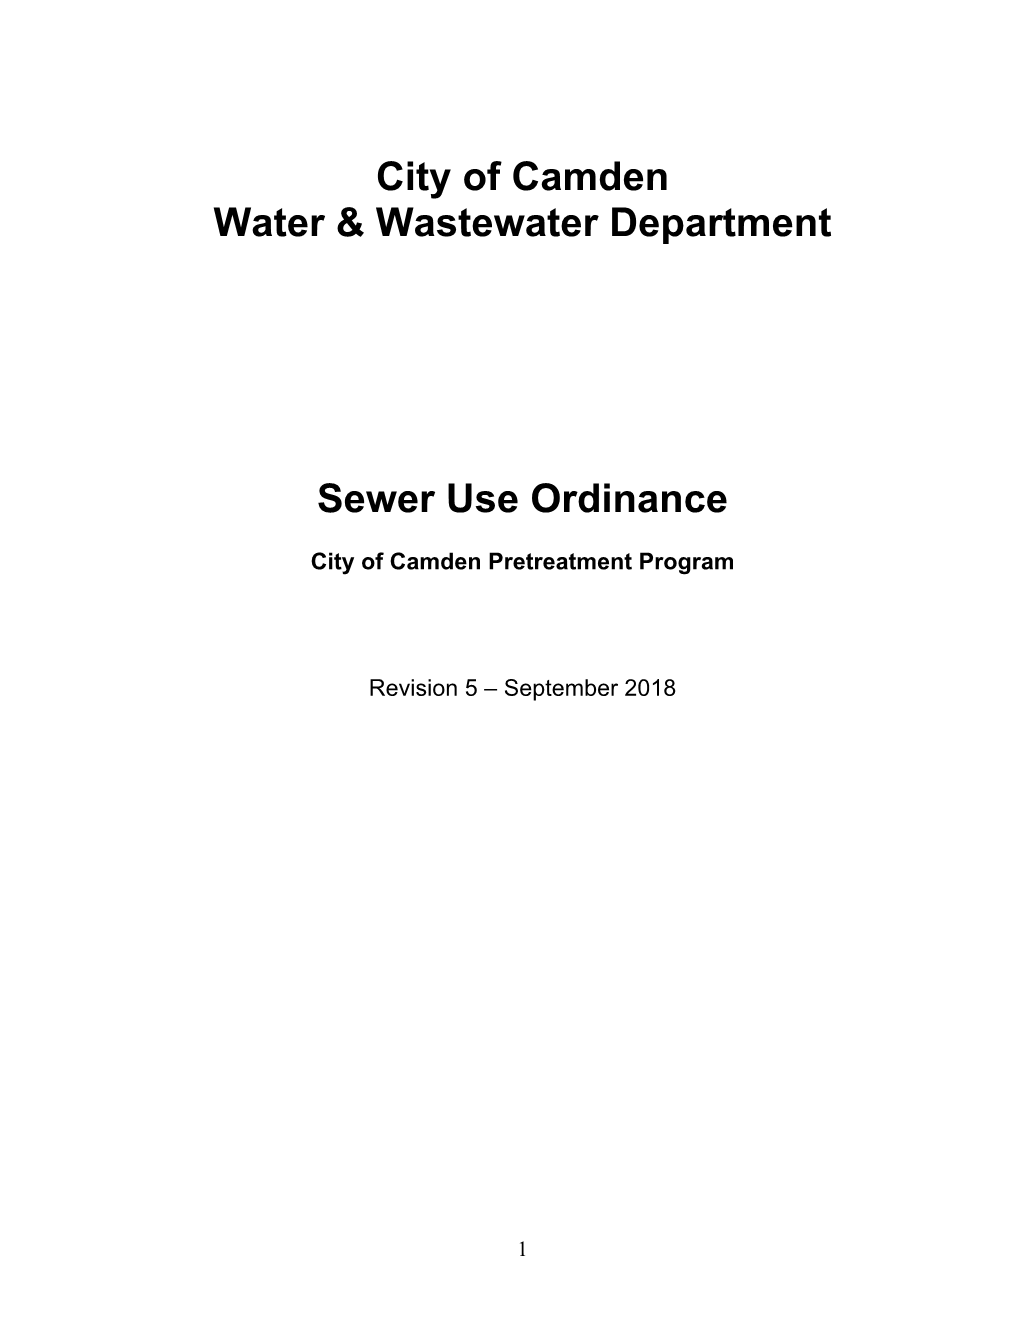 City of Camden Water & Wastewater Department Sewer Use Ordinance